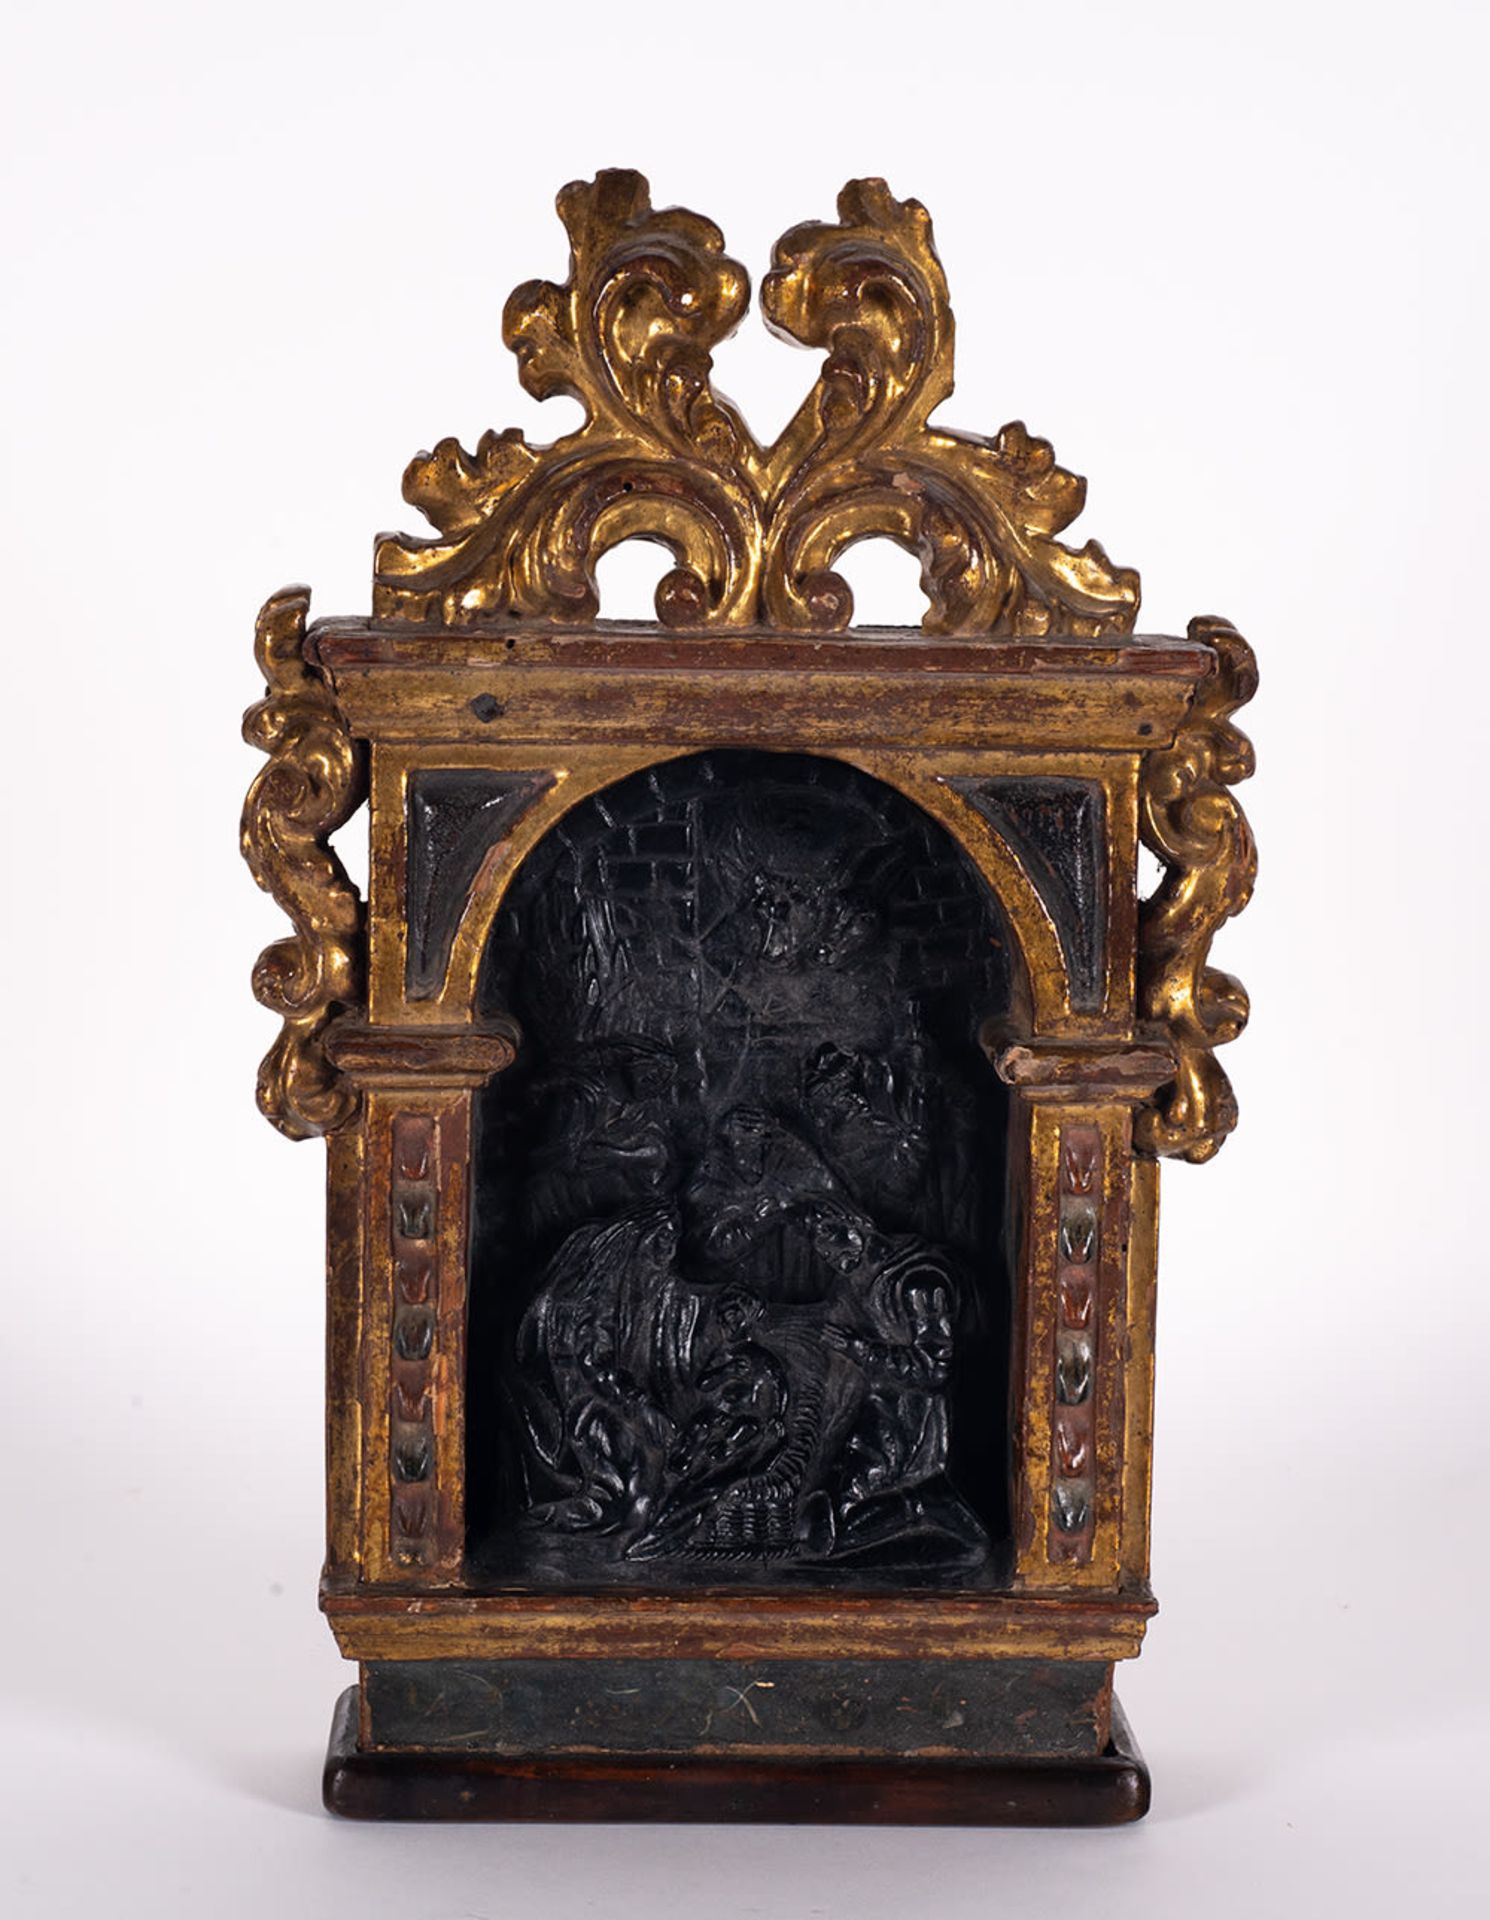 Rare Galician black amber chapel representing the "Adoration of the Shepherds", possibly Santiago, S